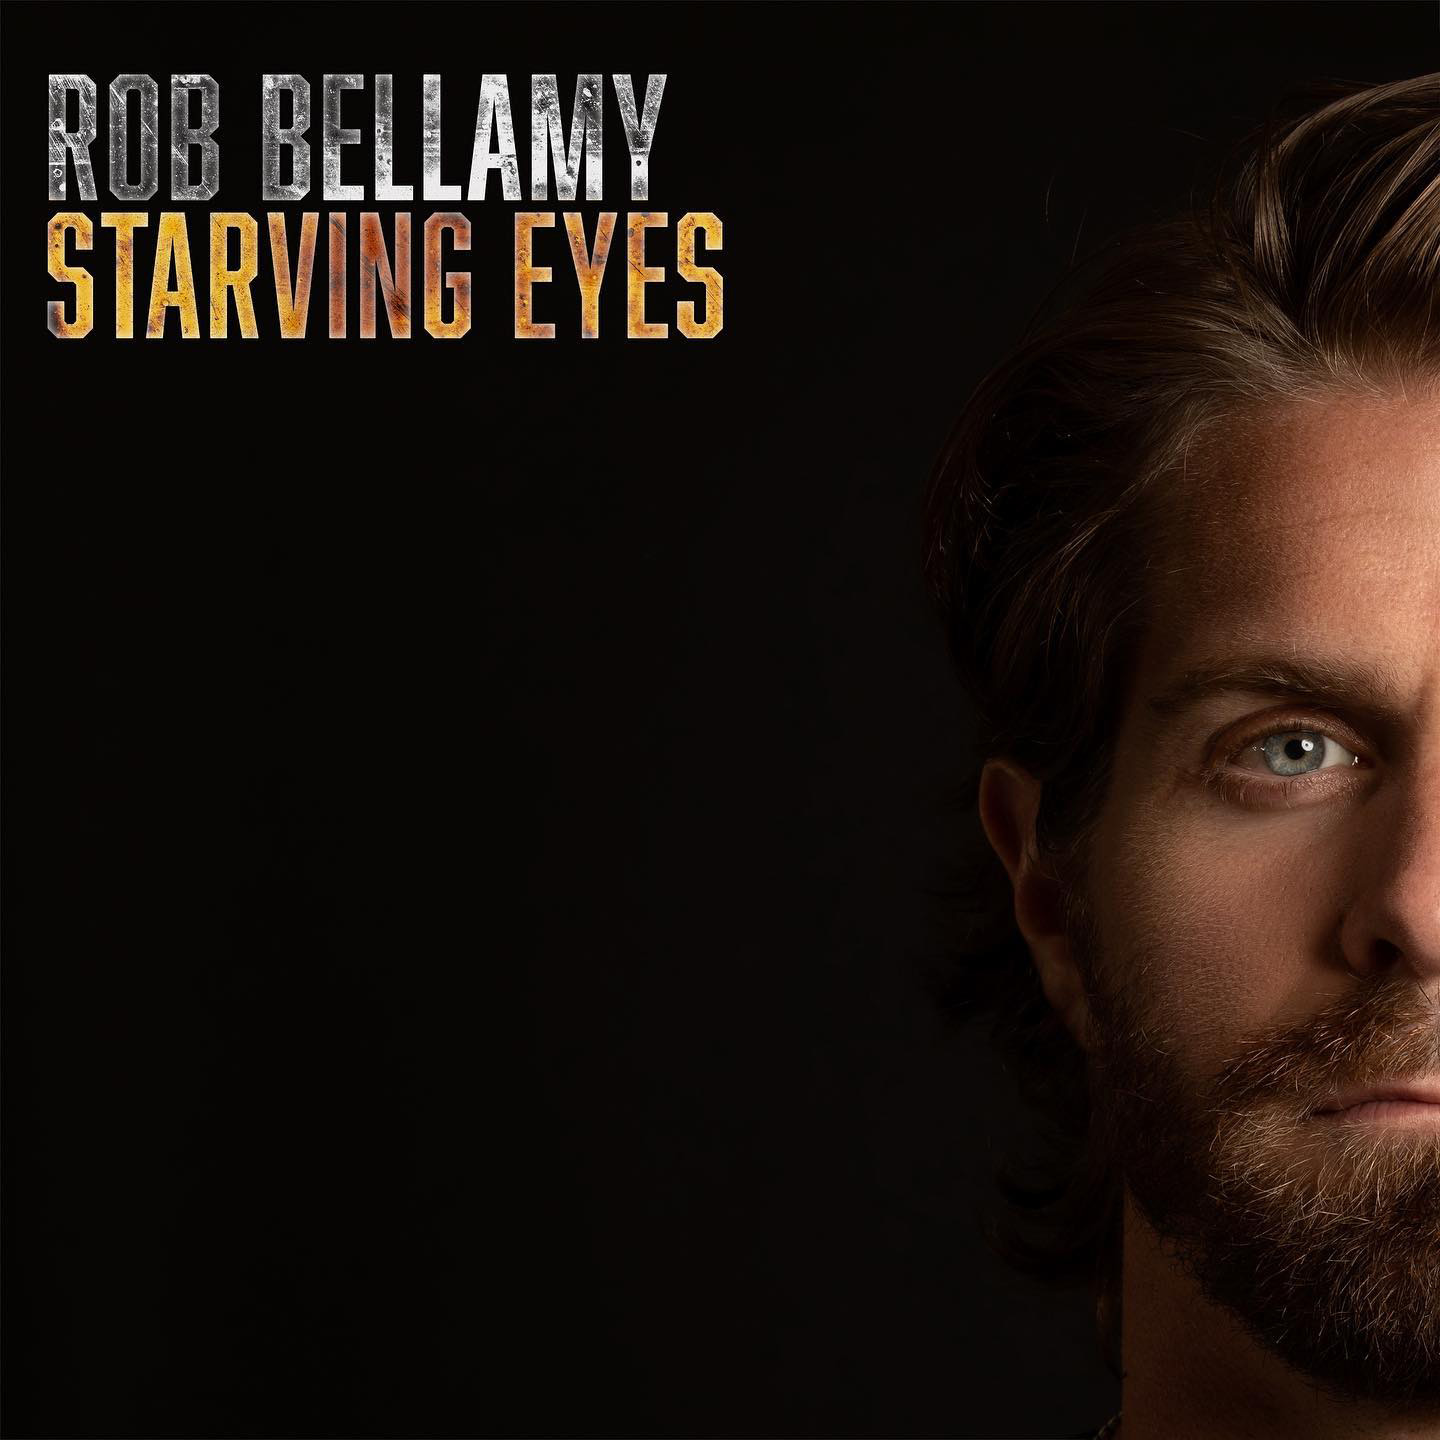 Rob Bellamy's 'Starving Eyes' EP is available everywhere now, October 30th